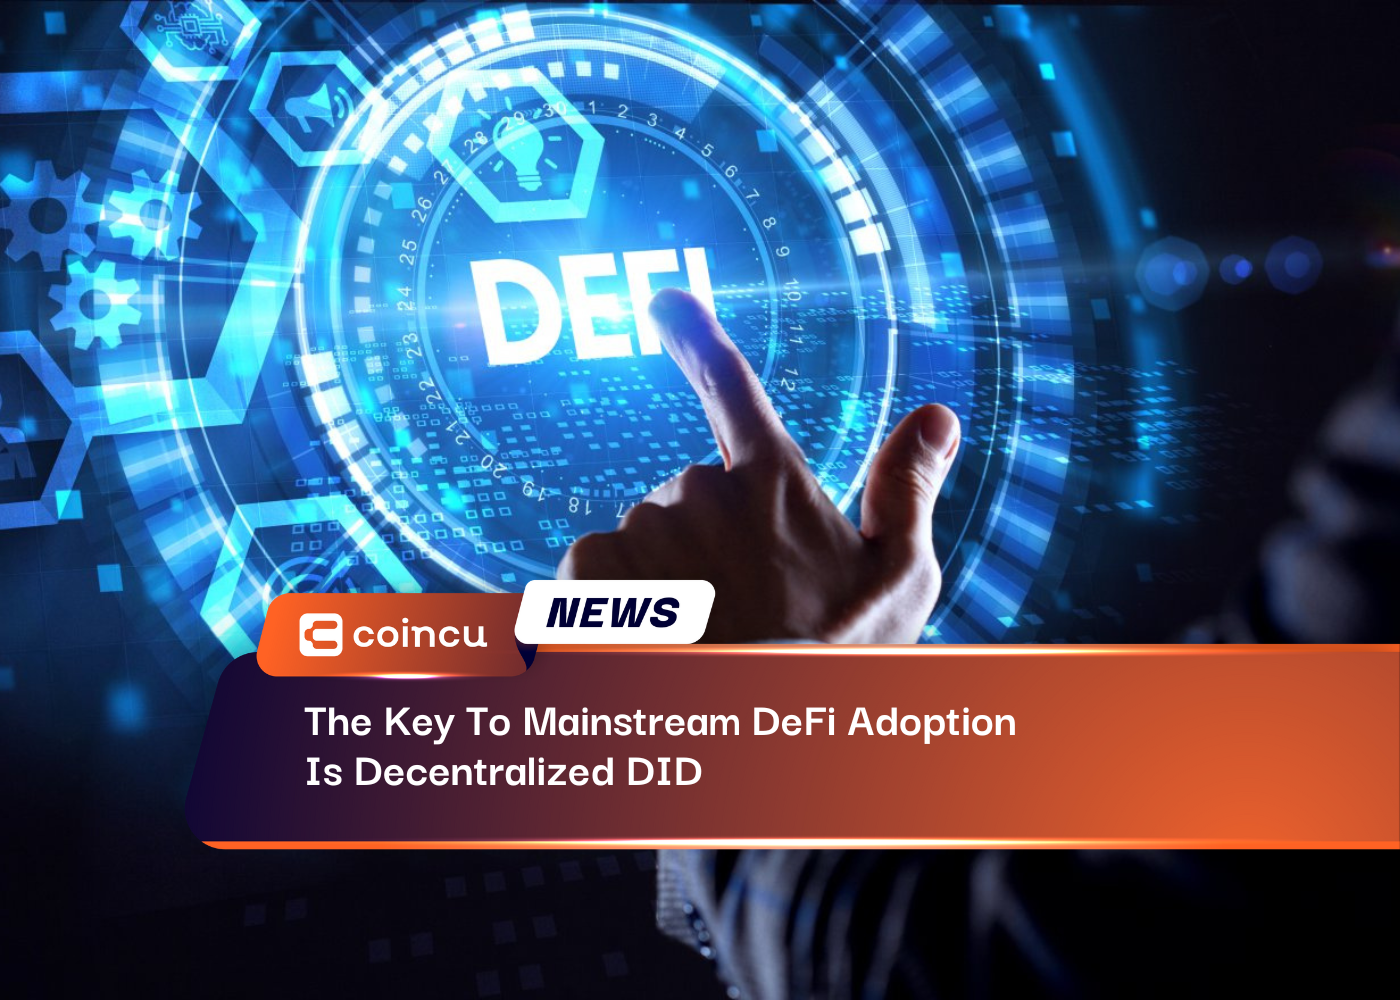 The Key To Mainstream DeFi Adoption Is Decentralized DID